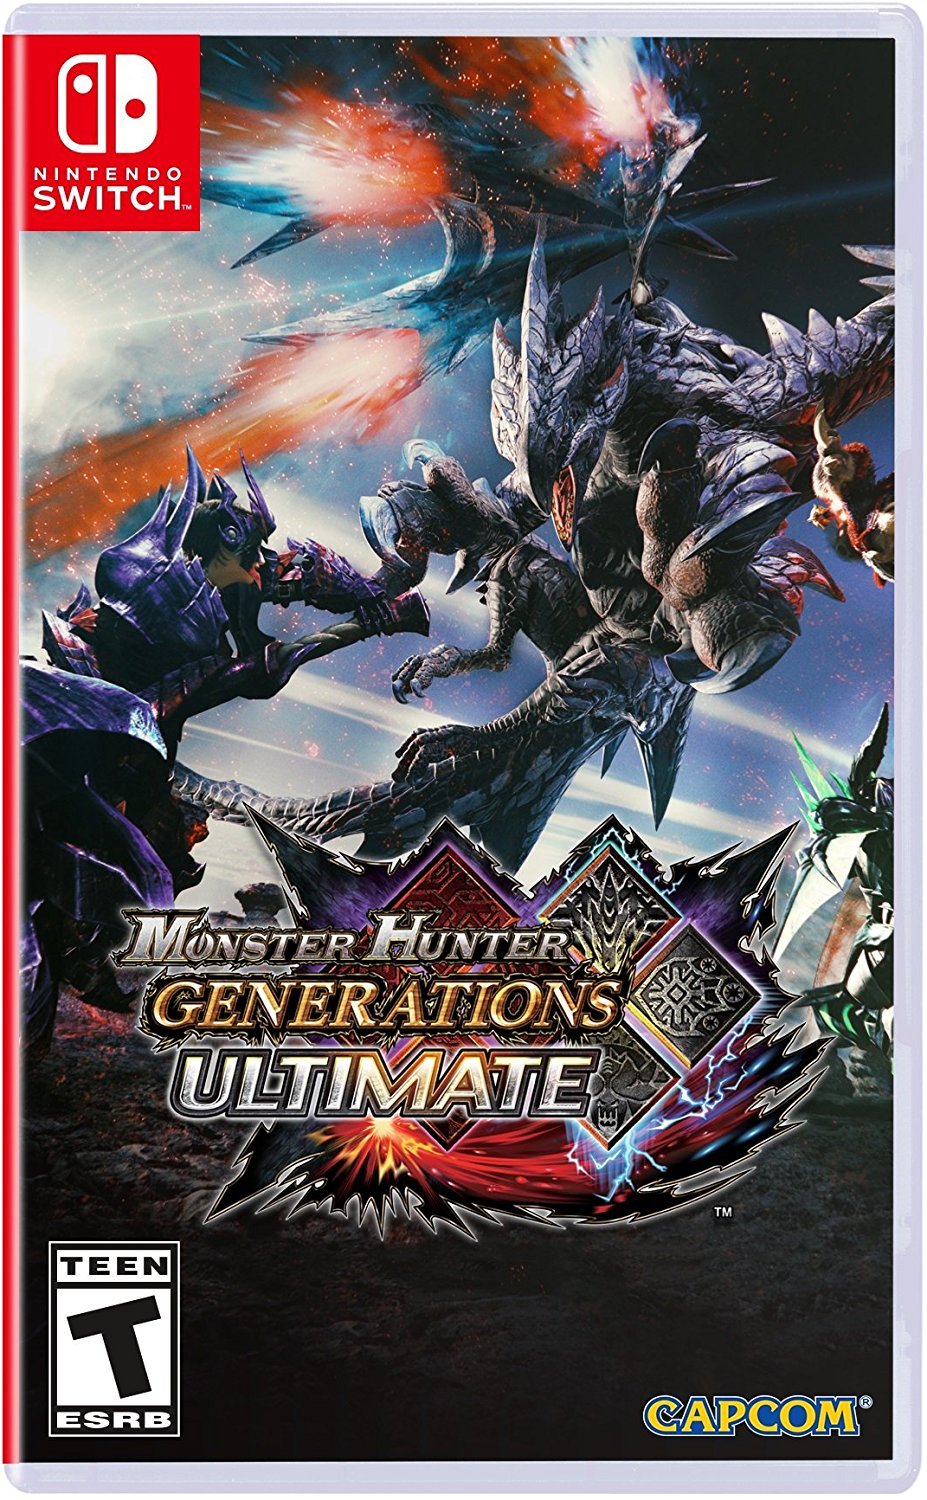 [Switch Save Progression] - Monster Hunter Generations Ultimate - Mods/Super Starter/Complete Save Akirac Other Mods Seasonal and Non Seasonal Save Mod - Modded Items and Gear - Hacks - Cheats - Trainers for Playstation 4 - Playstation 5 - Nintendo Switch - Xbox One